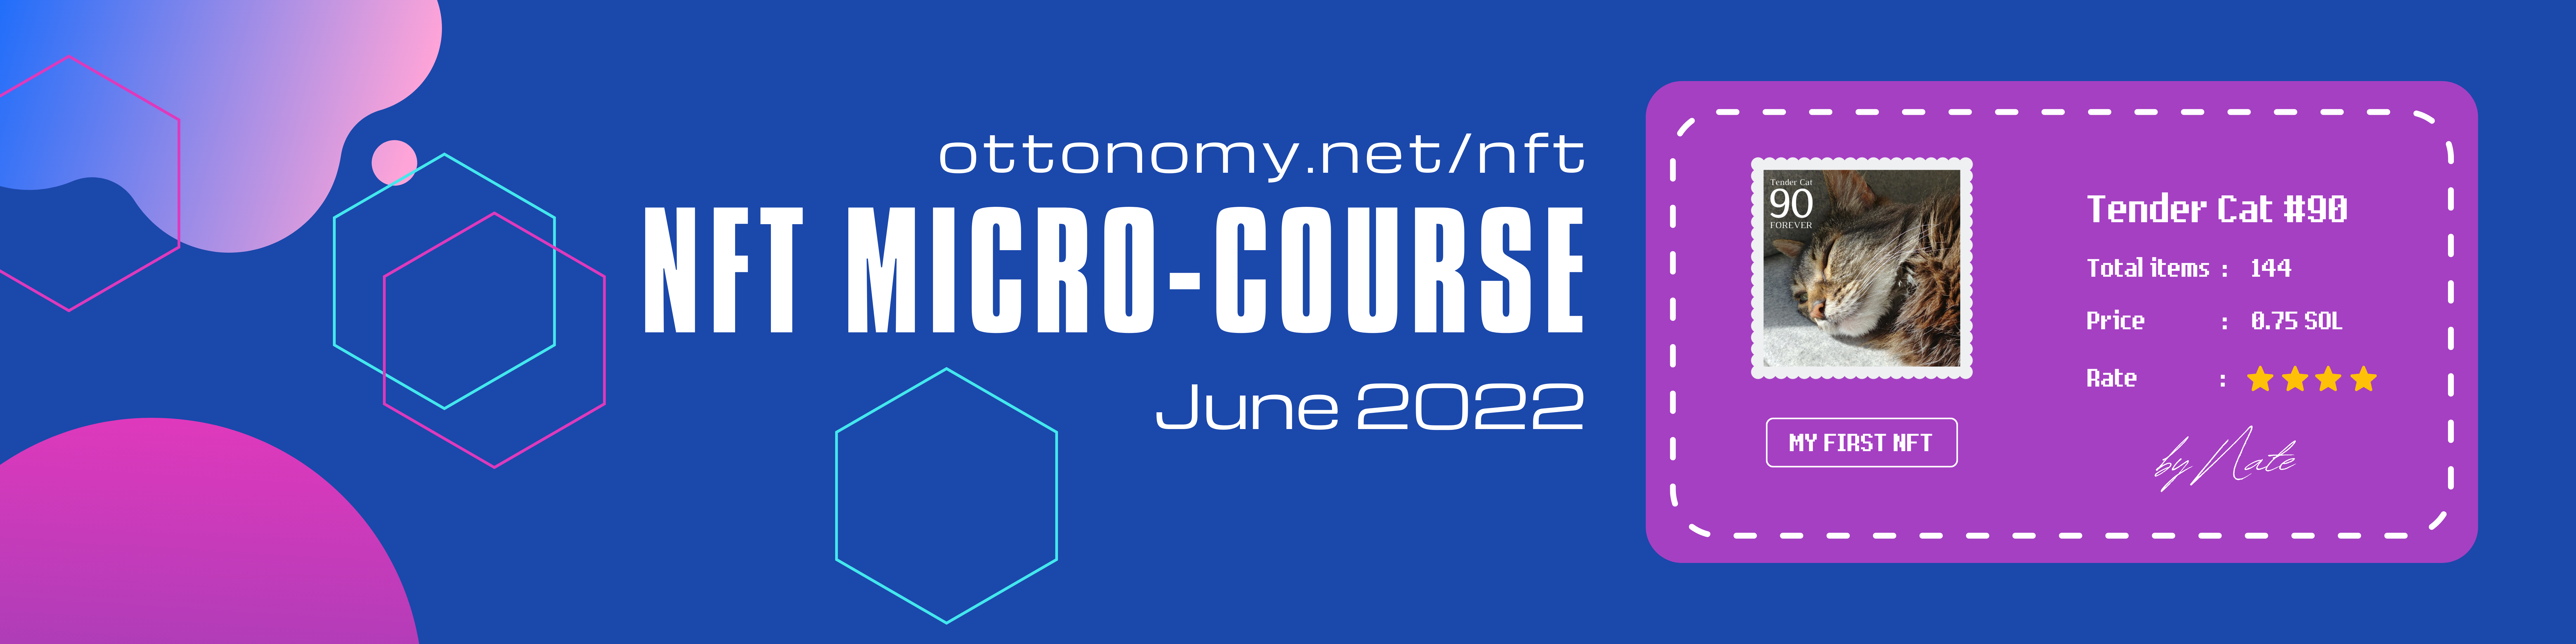 Sign up for an intro to NFTs micro-course